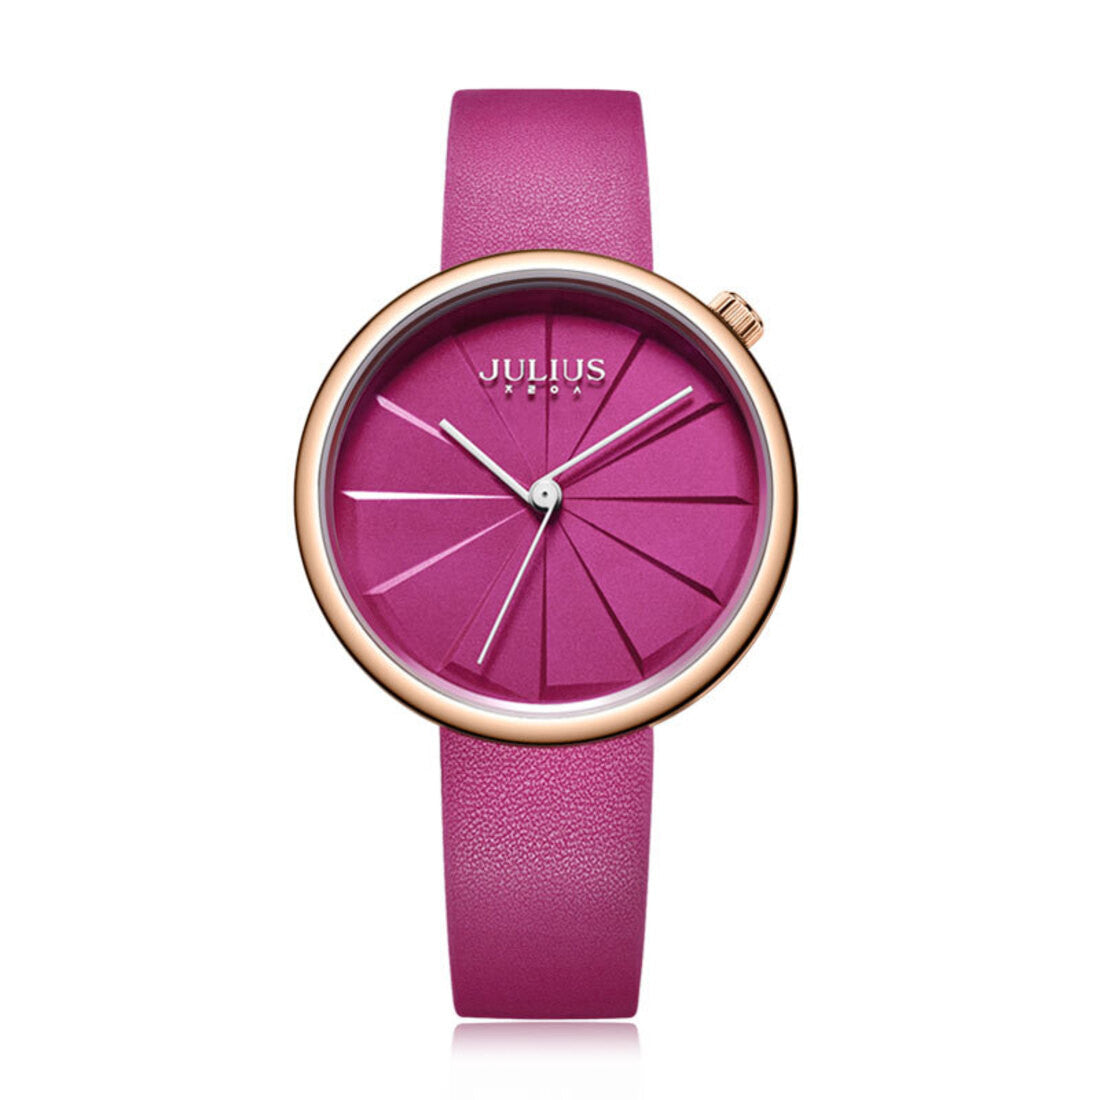 Women's Pink Color Analog Watch with Leather Band - Gift Box Included